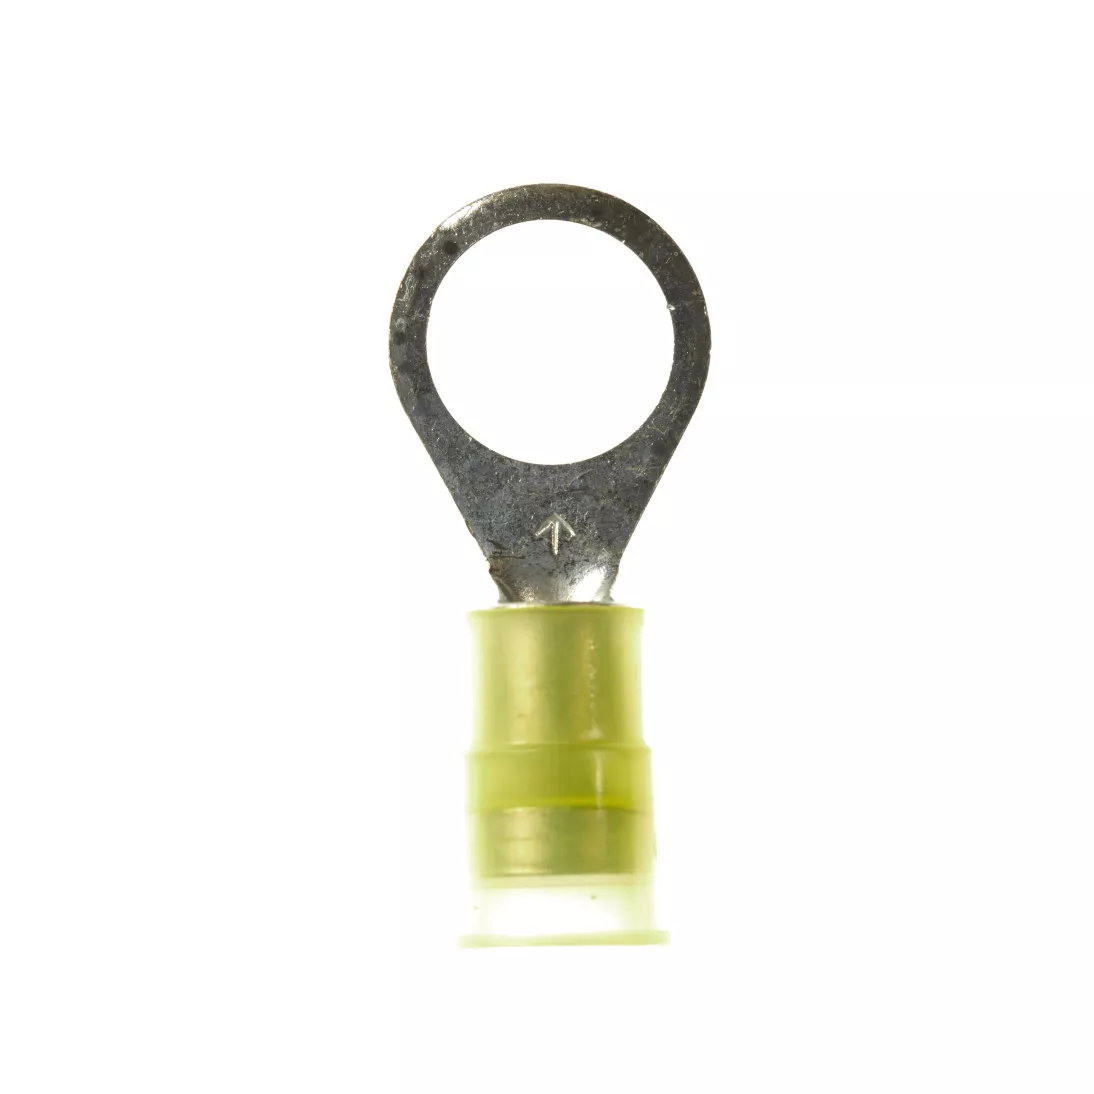 3M™ Scotchlok™ Ring Tongue, Nylon Insulated w/Insulation Grip
MNG10-38R/SK, Stud Size 3/8, 500/Case